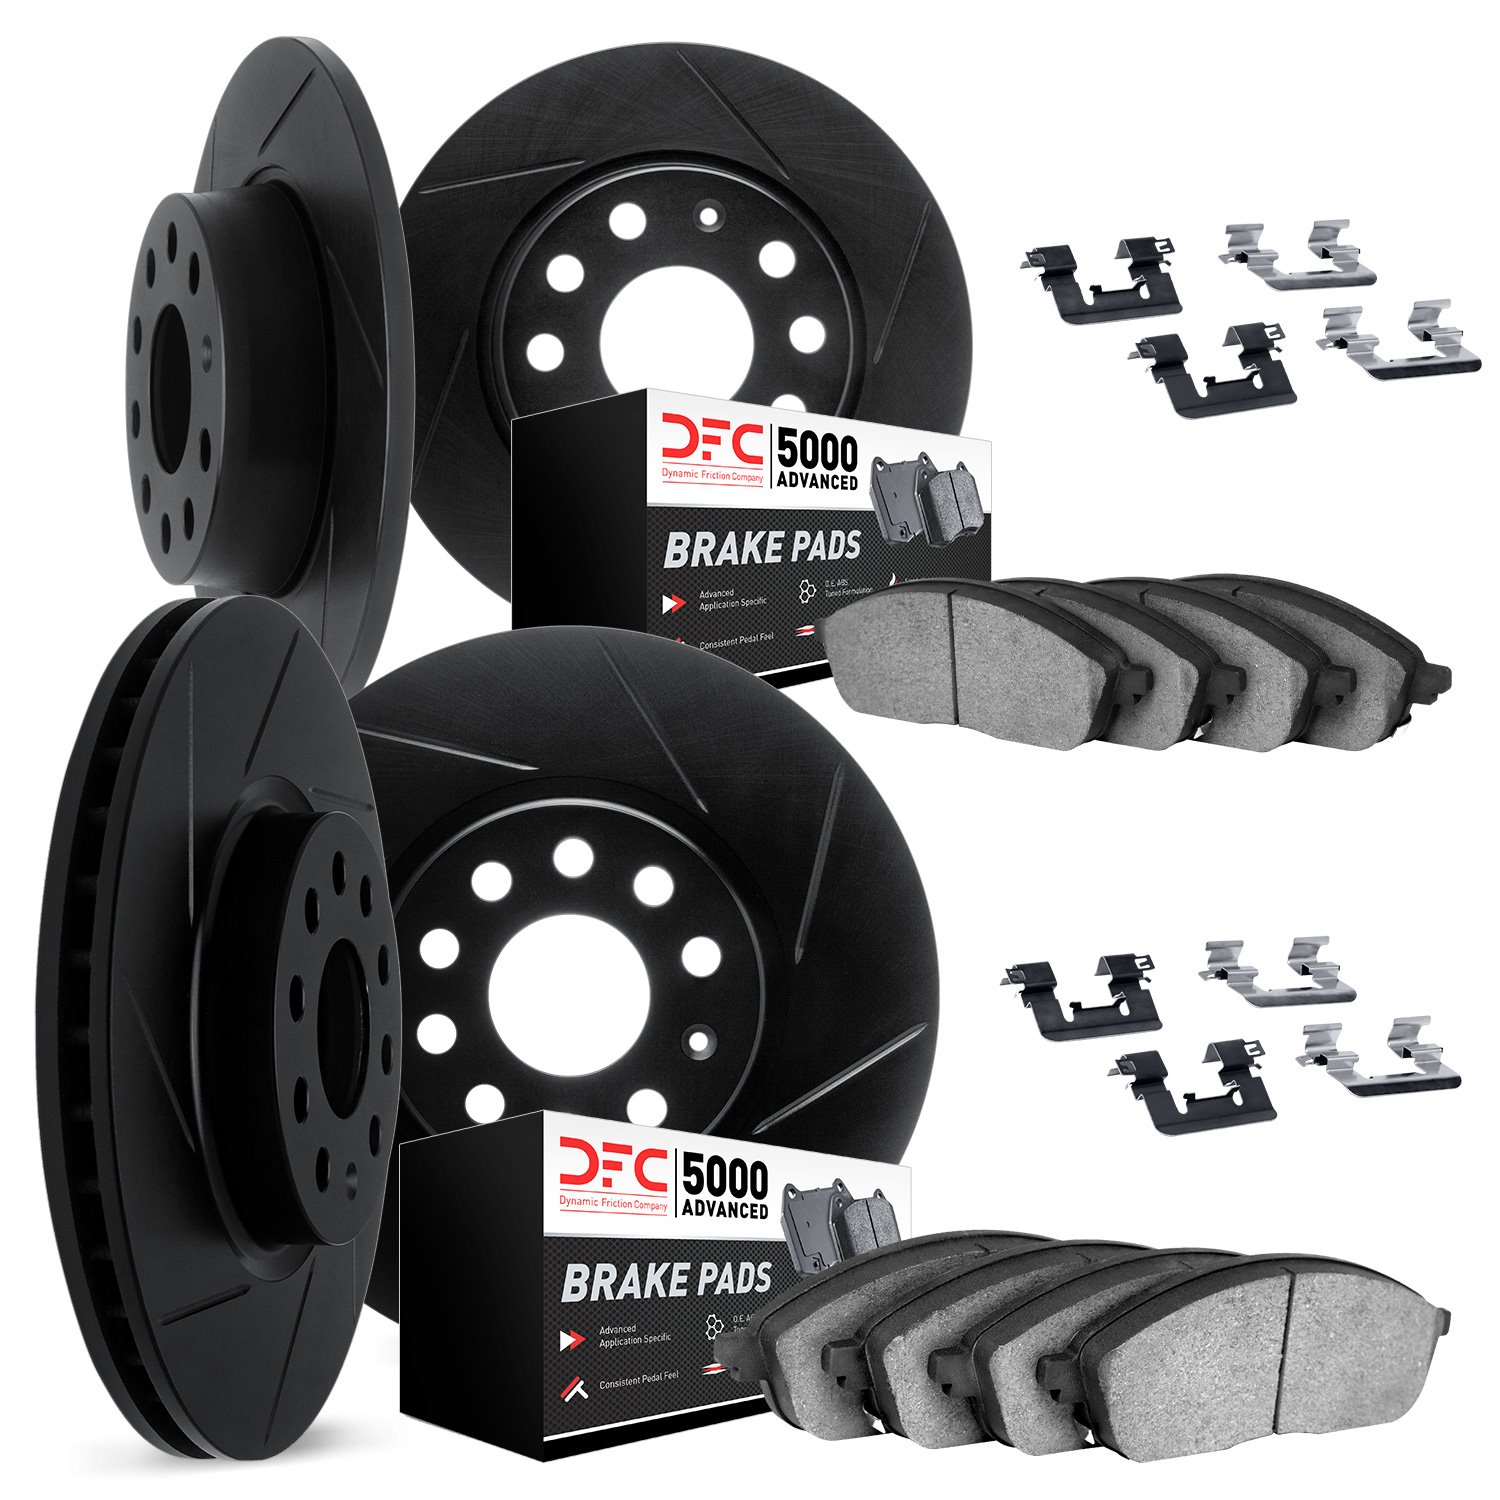 3514-59070 Slotted Brake Rotors w/5000 Advanced Brake Pads Kit & Hardware [Black], 2006-2014 Acura/Honda, Position: Front and Re